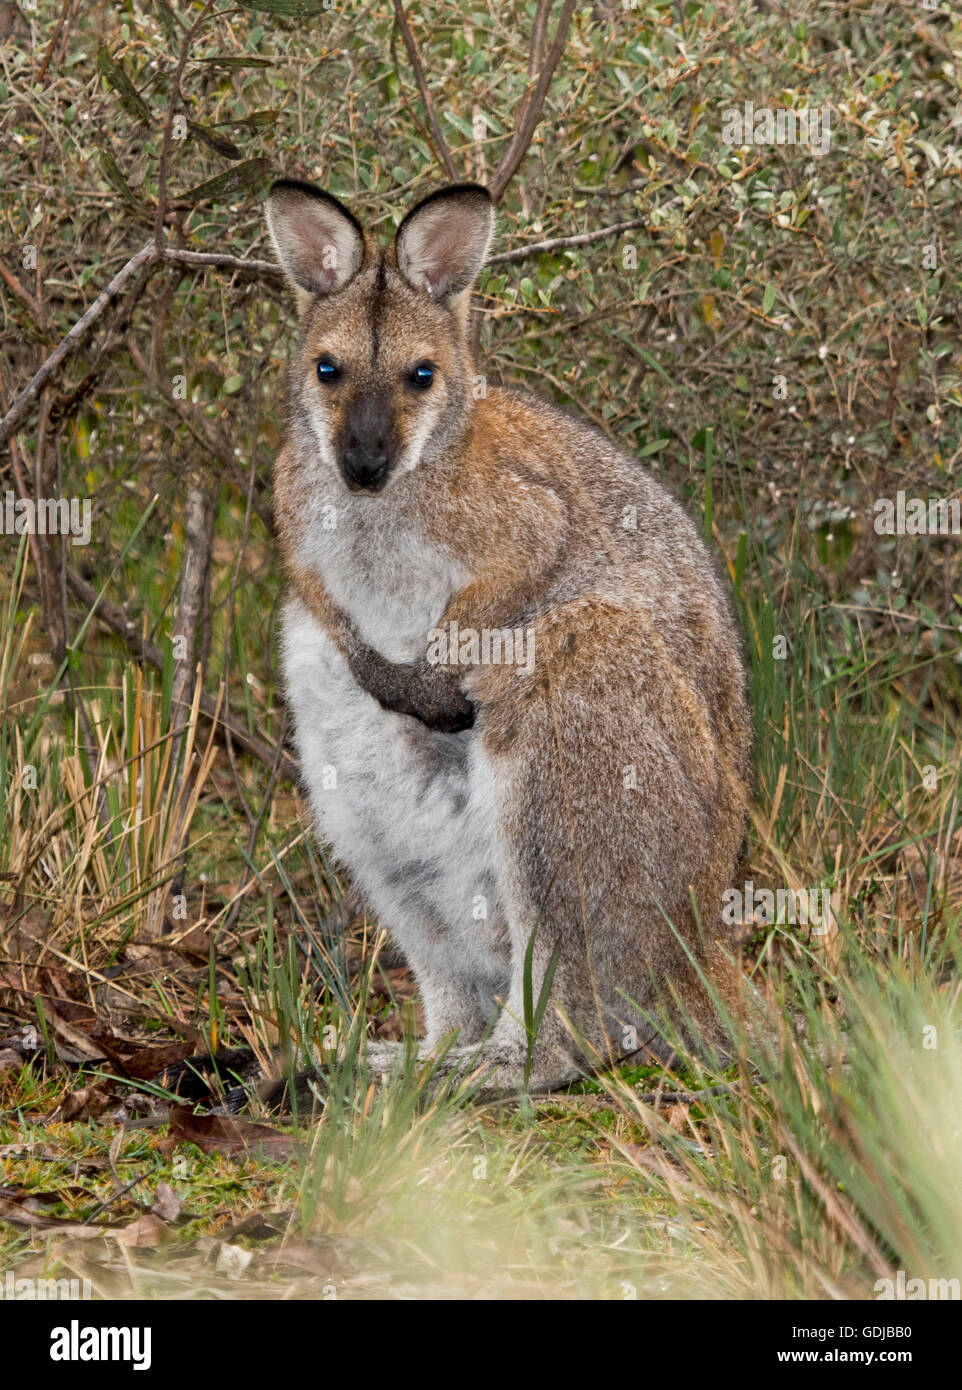 Beautiful red-necked / Bennett's wallaby Macropus rufogriseus  in the wild on edge of forest looking at camera with alert expression, Wollemi Nat Park Stock Photo